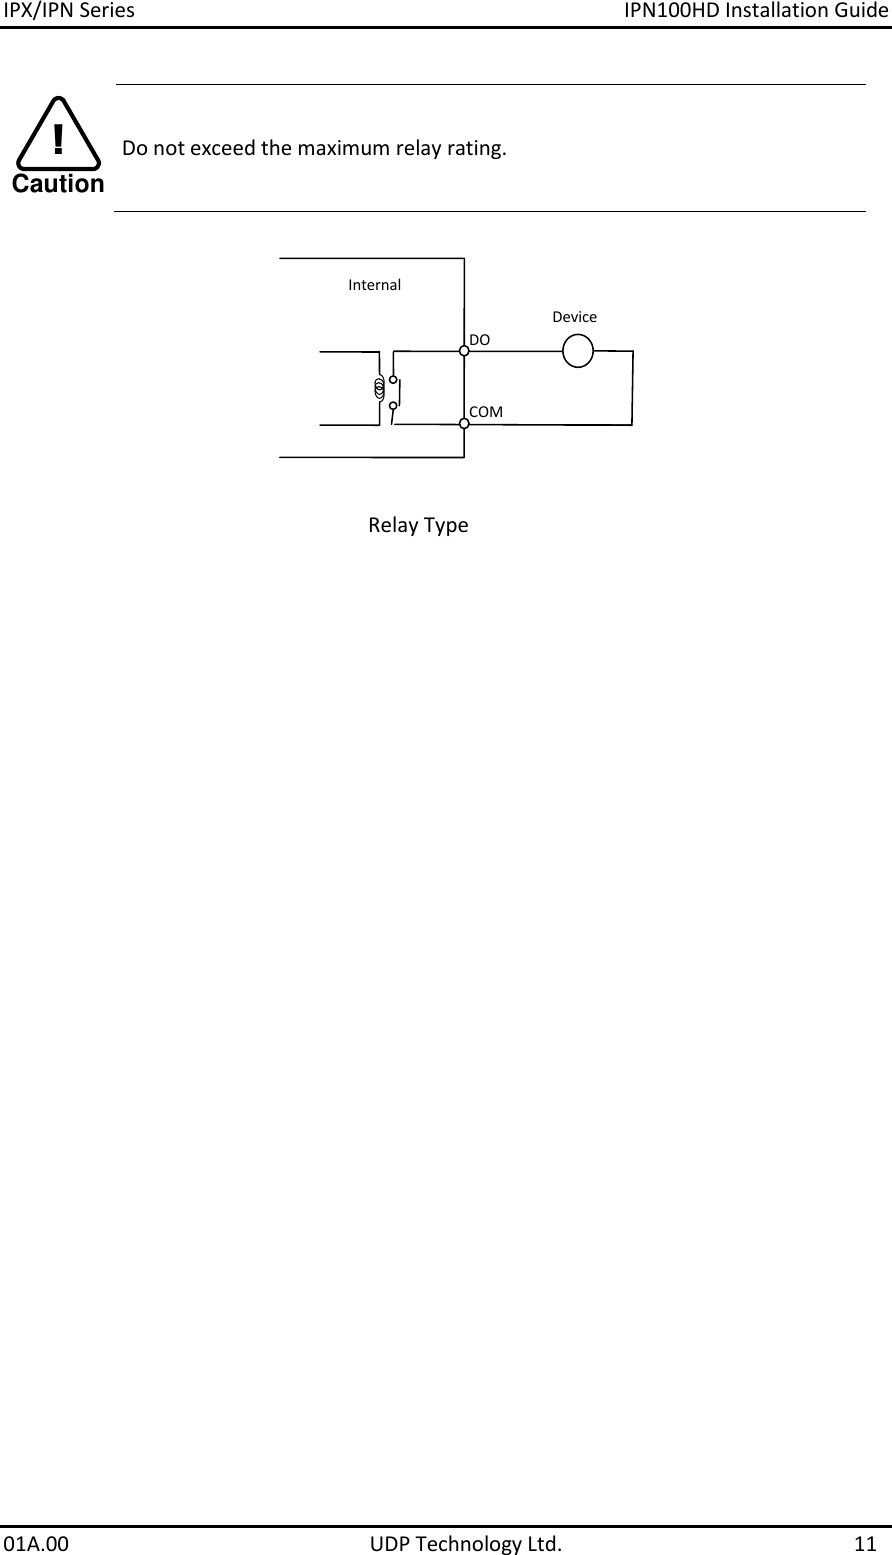 IPX/IPN Series  IPN100HD Installation Guide 01A.00    UDP Technology Ltd.  11 Caution! Do not exceed the maximum relay rating.    DO  COM Relay Type Device Internal 